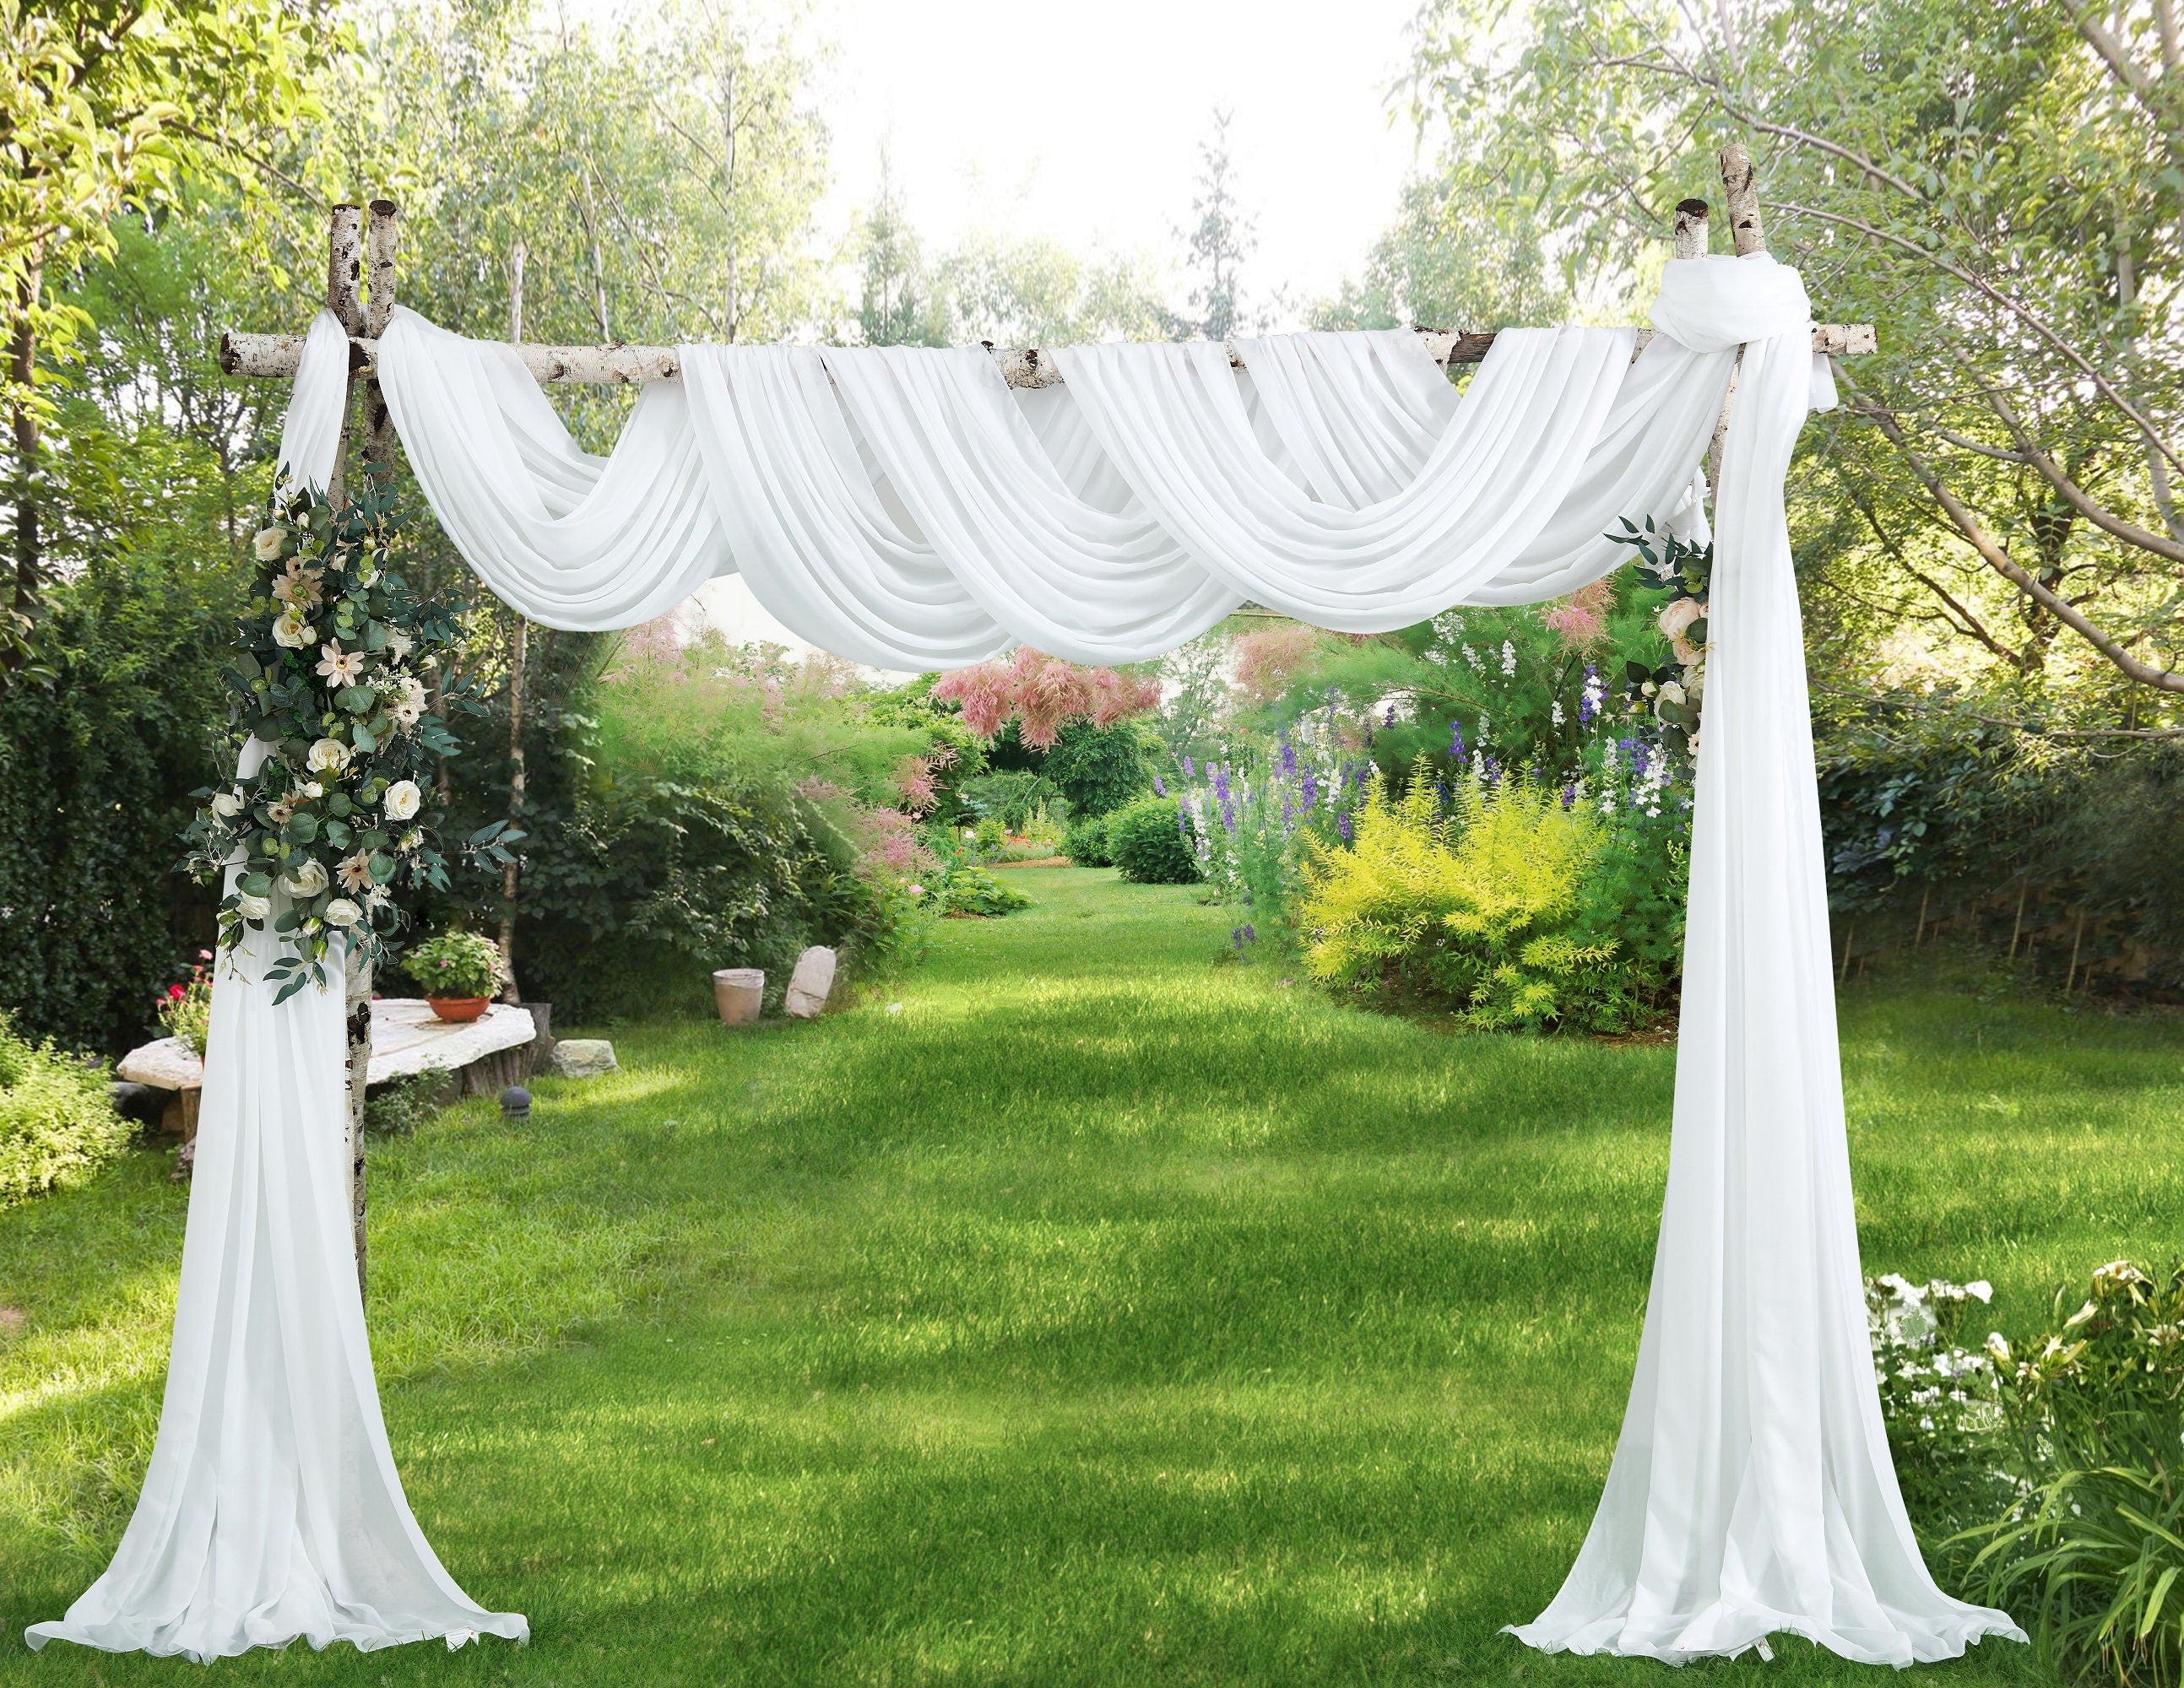 2 Chiffon Wedding Arch Draping Fabric Scarves in 18 or 24 Foot Length 